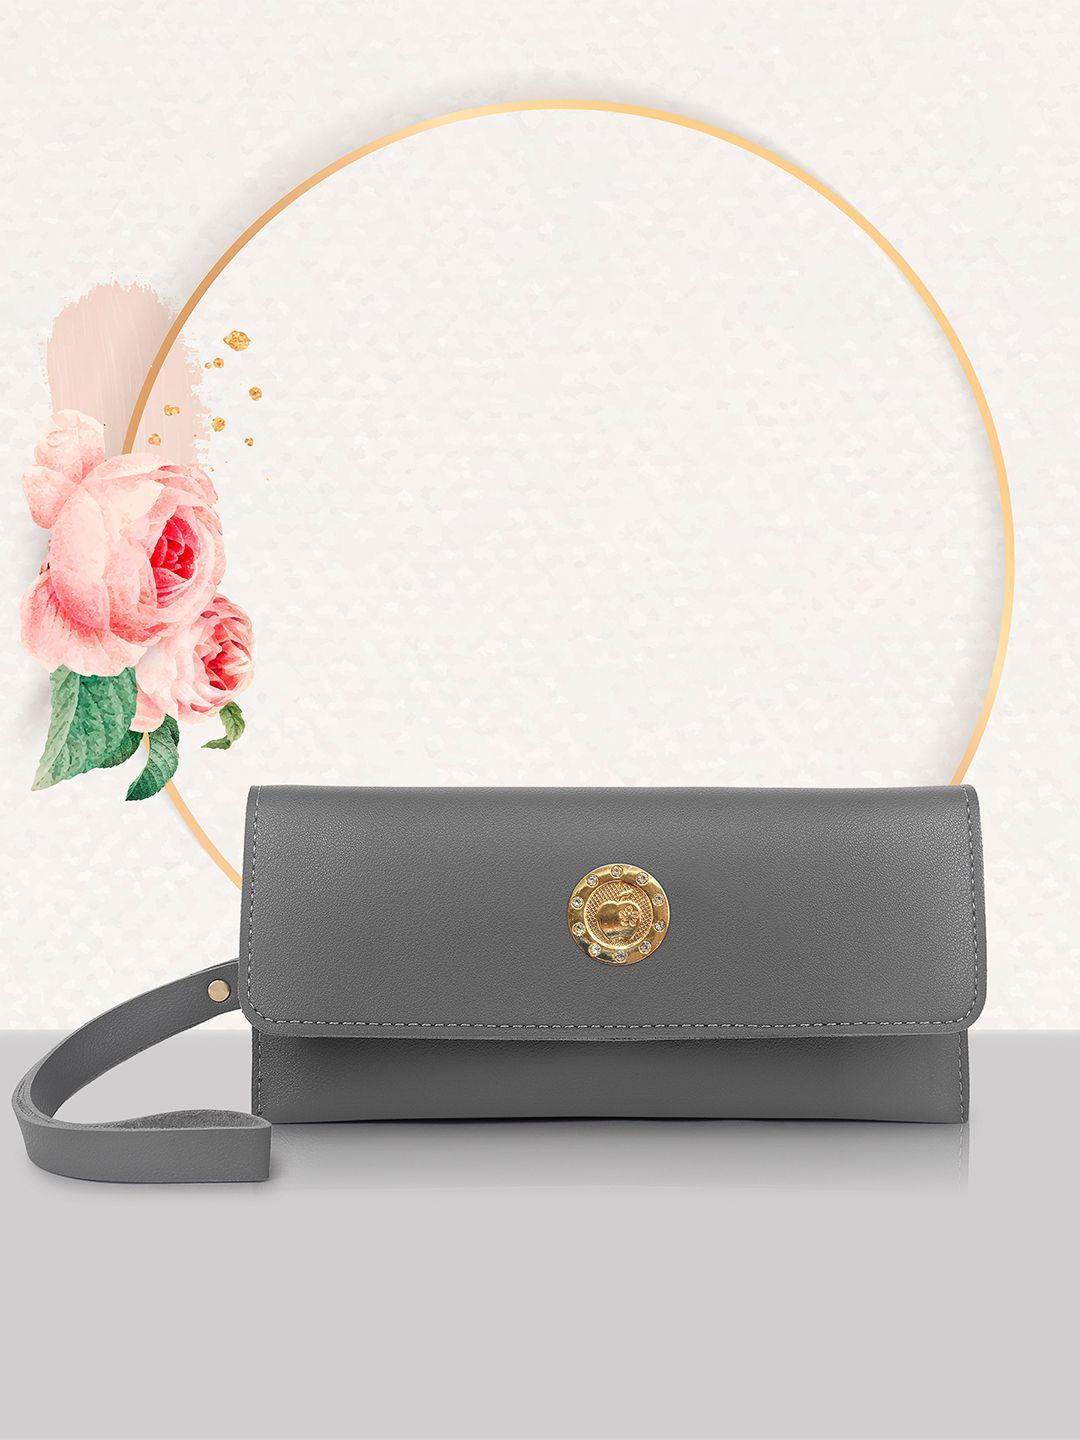 stropcarry women grey & gold-toned embroidered envelope clutch